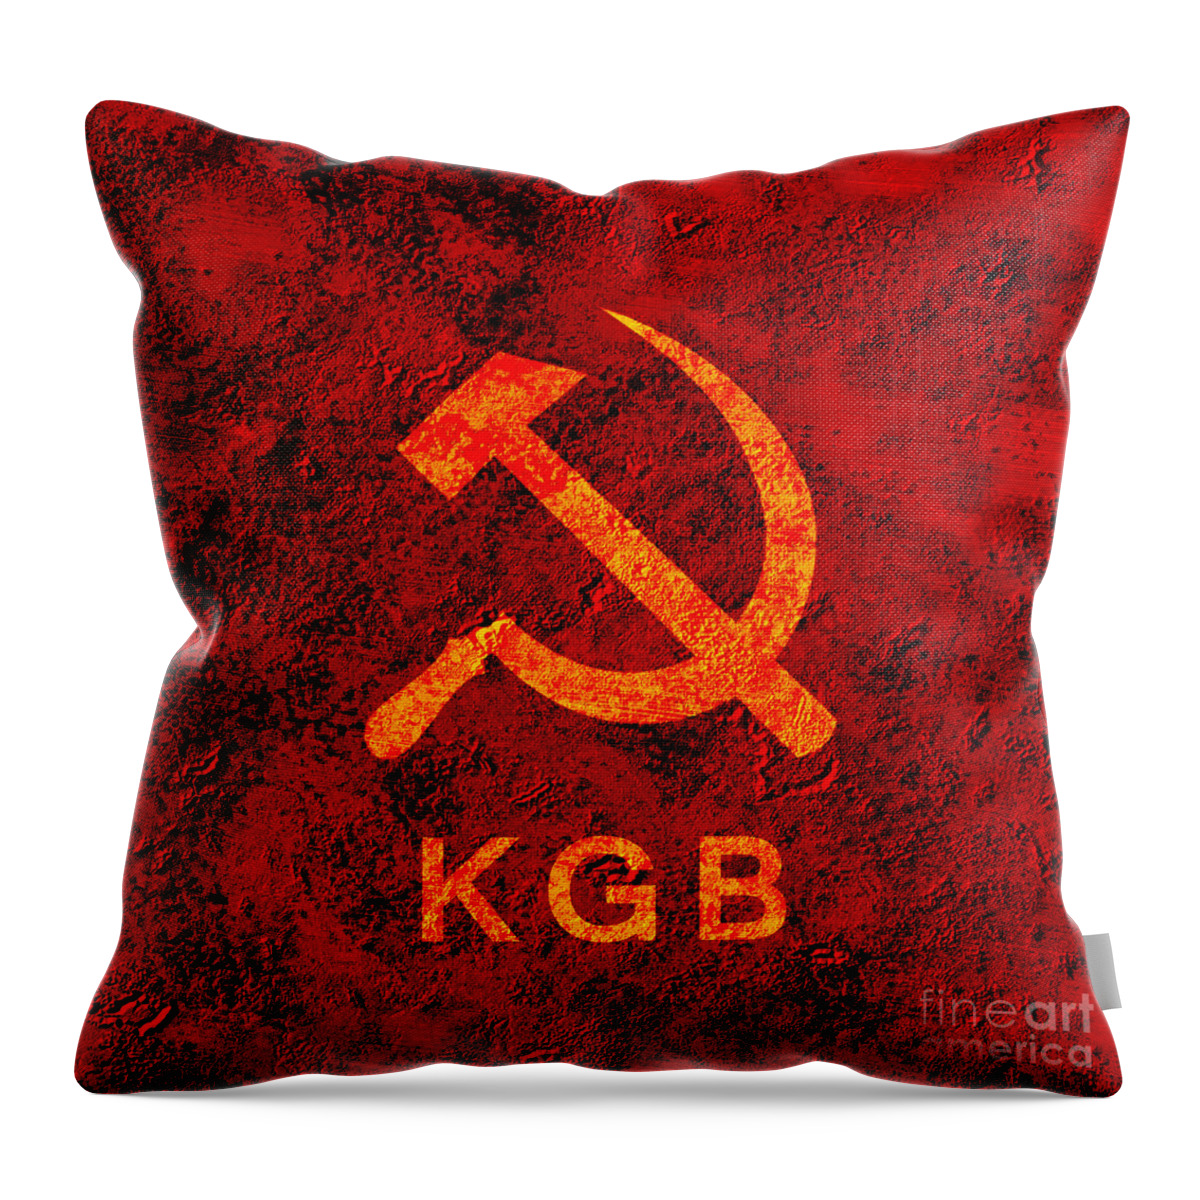 Old Throw Pillow featuring the digital art KGB by Bruce Rolff